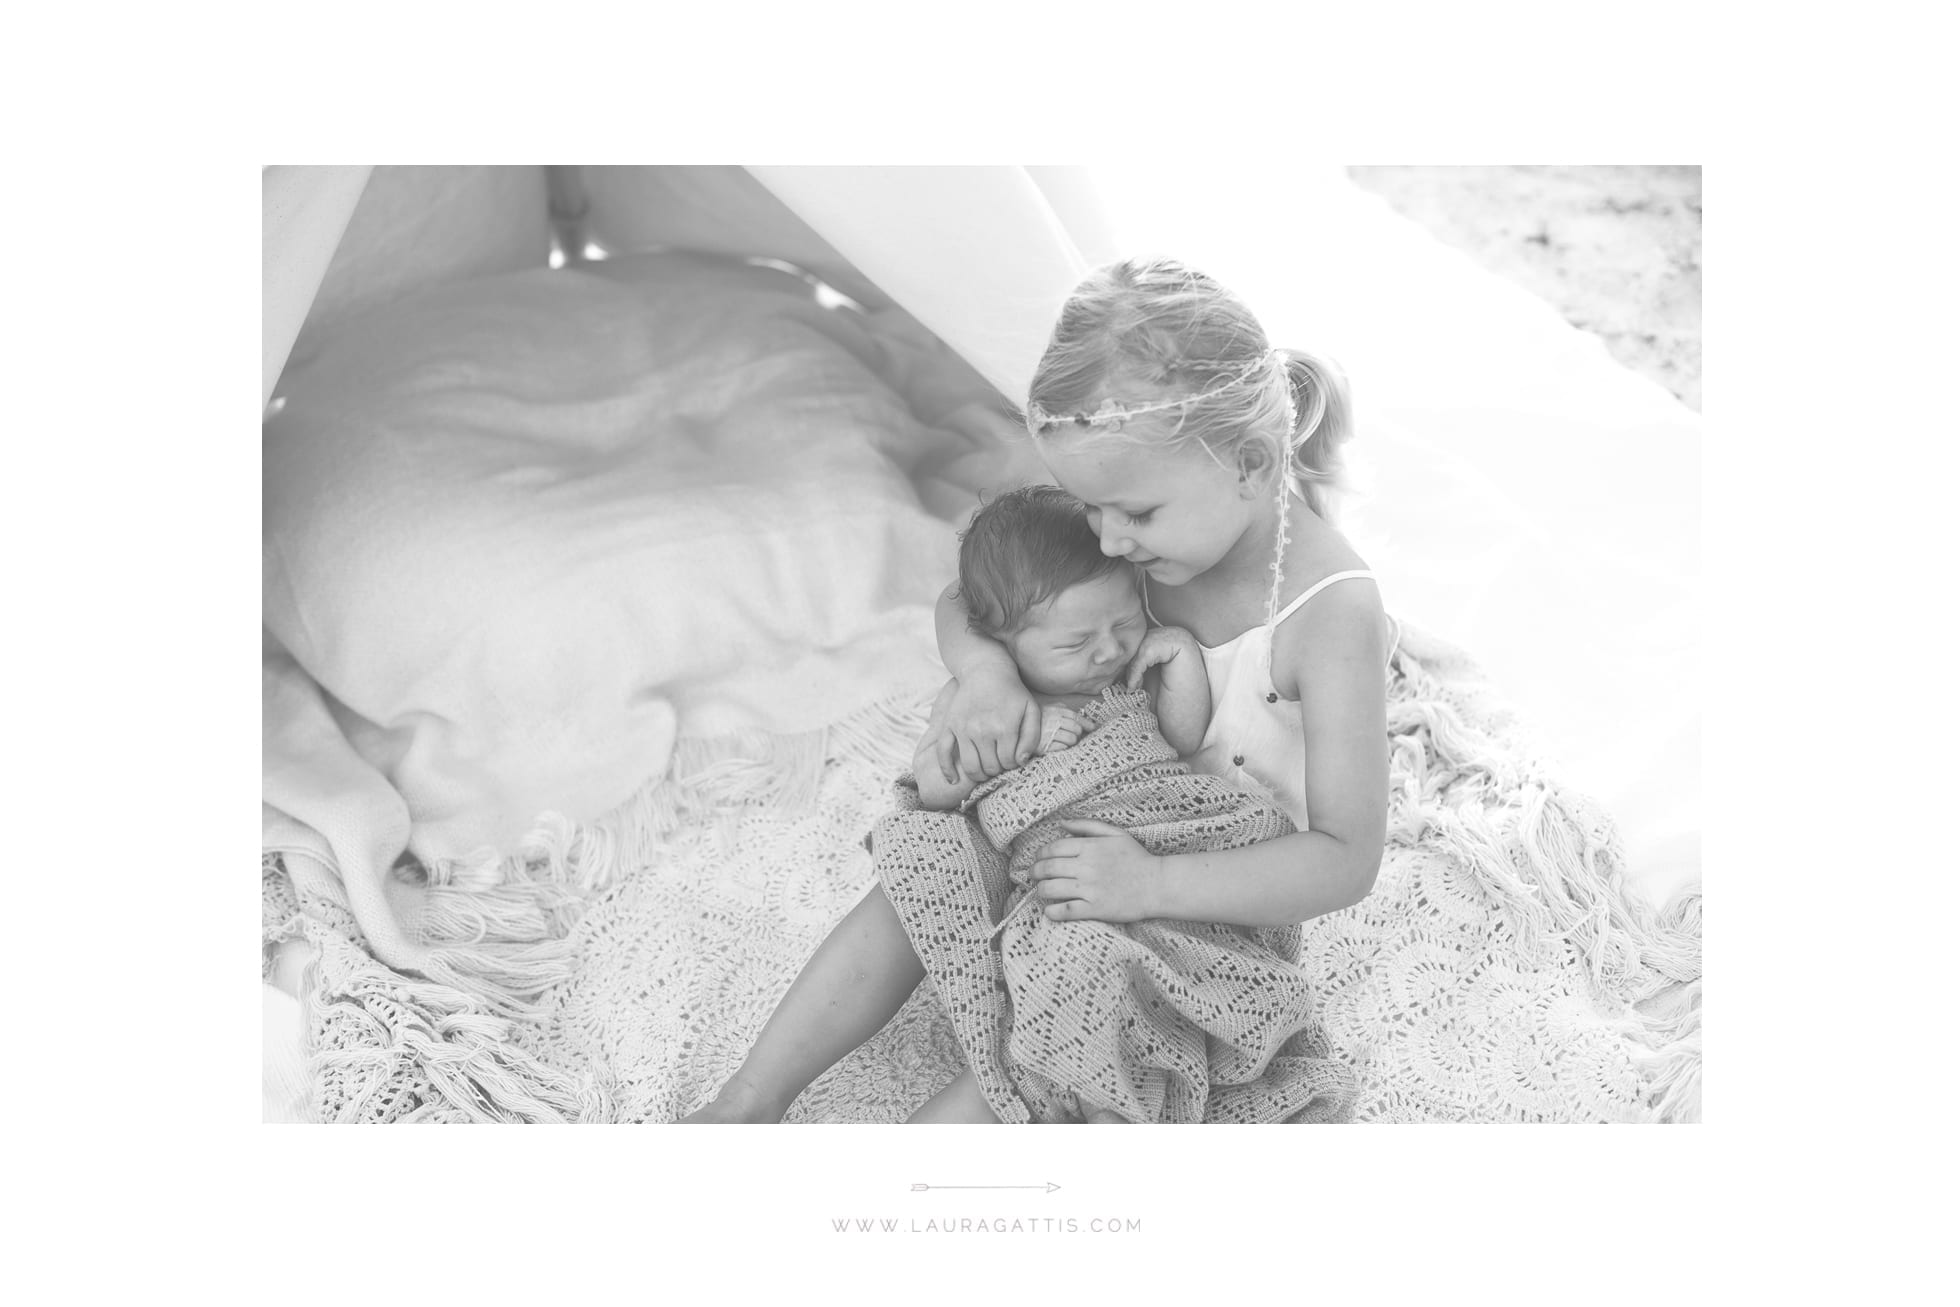 outdoor newborn session | natural light photography | laura gattis photography